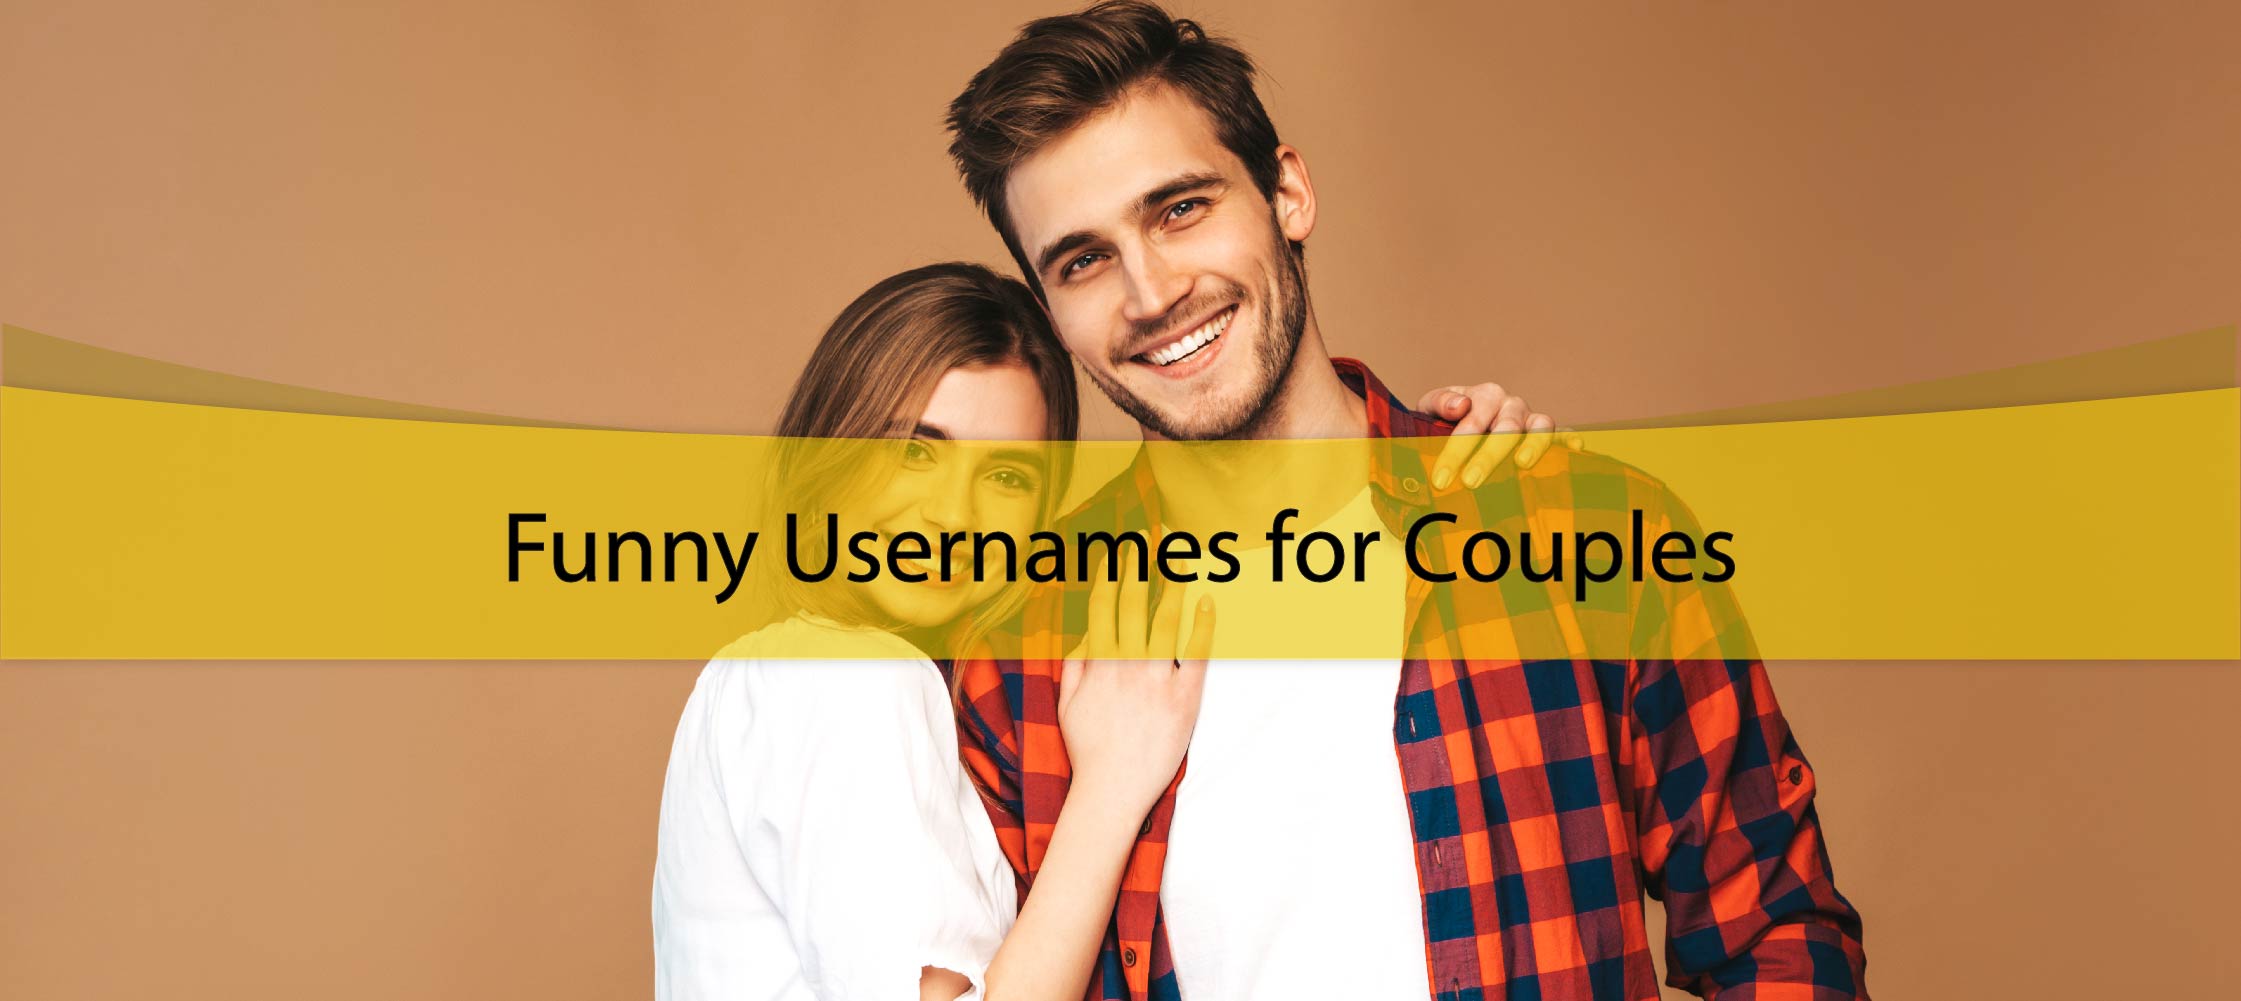 Funny Usernames for Couples